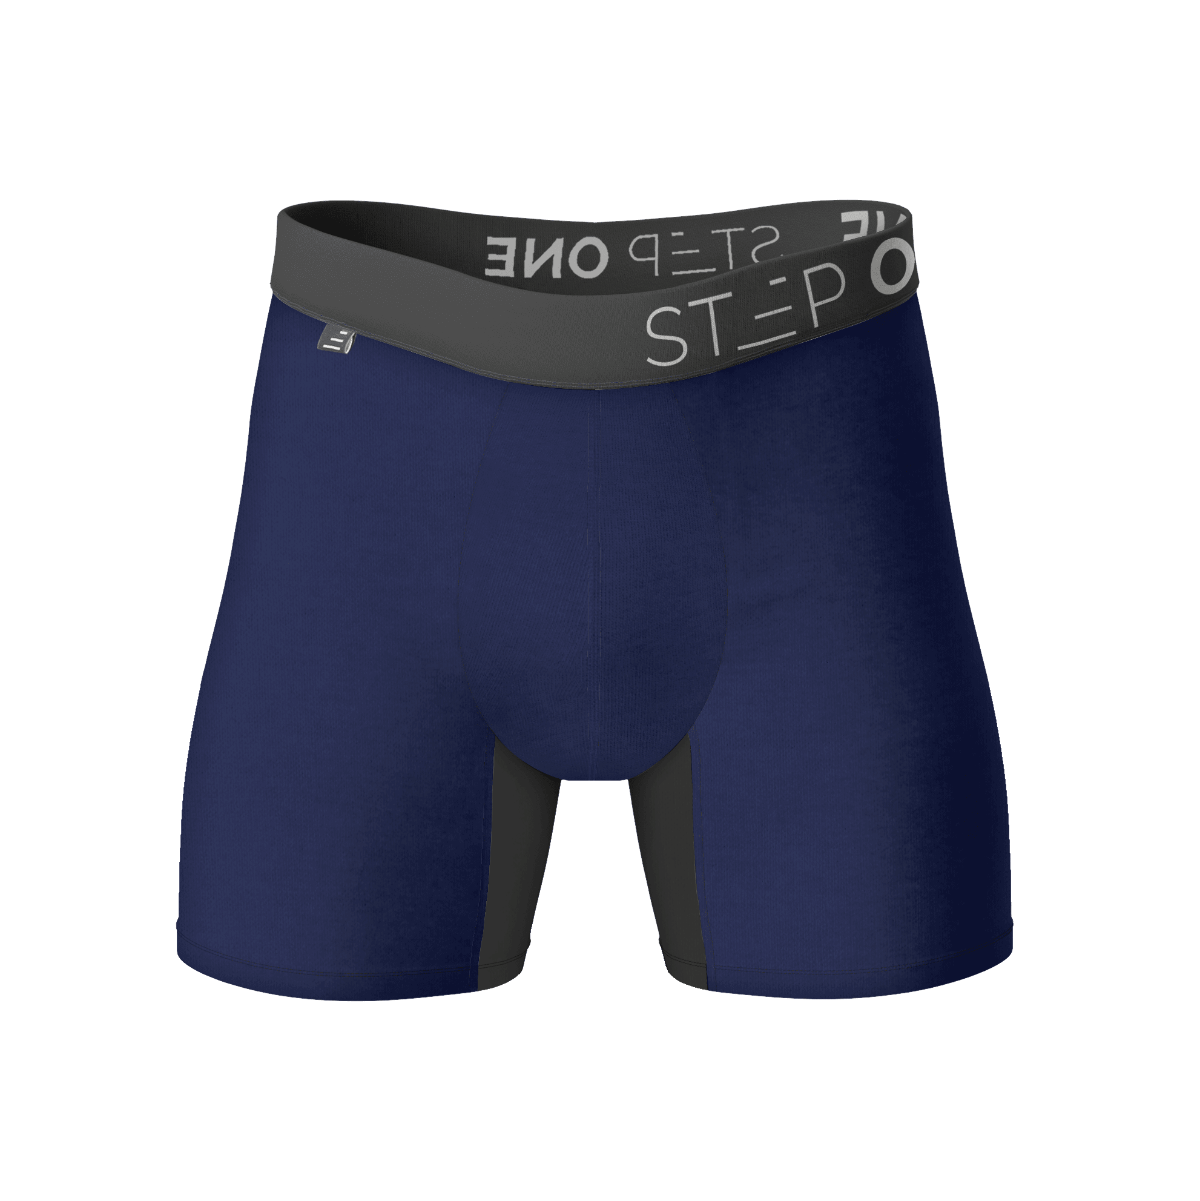 Mens Bamboo Underwear at Step One